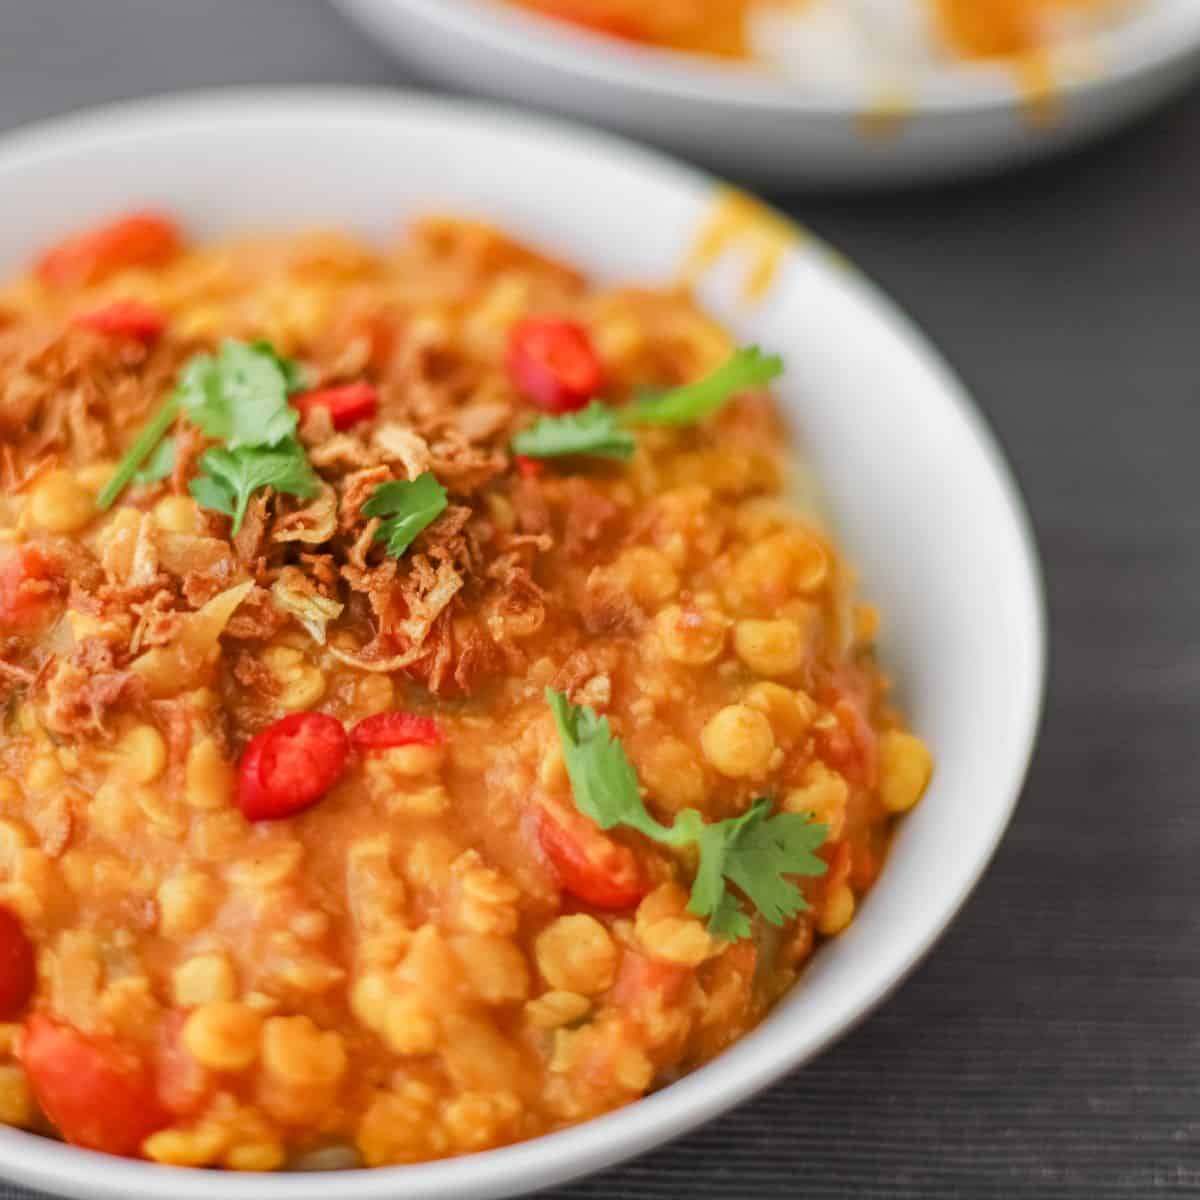 Vegan Lentils with Tomatoes and Tamarind – a simple, quick and delicious supper dish